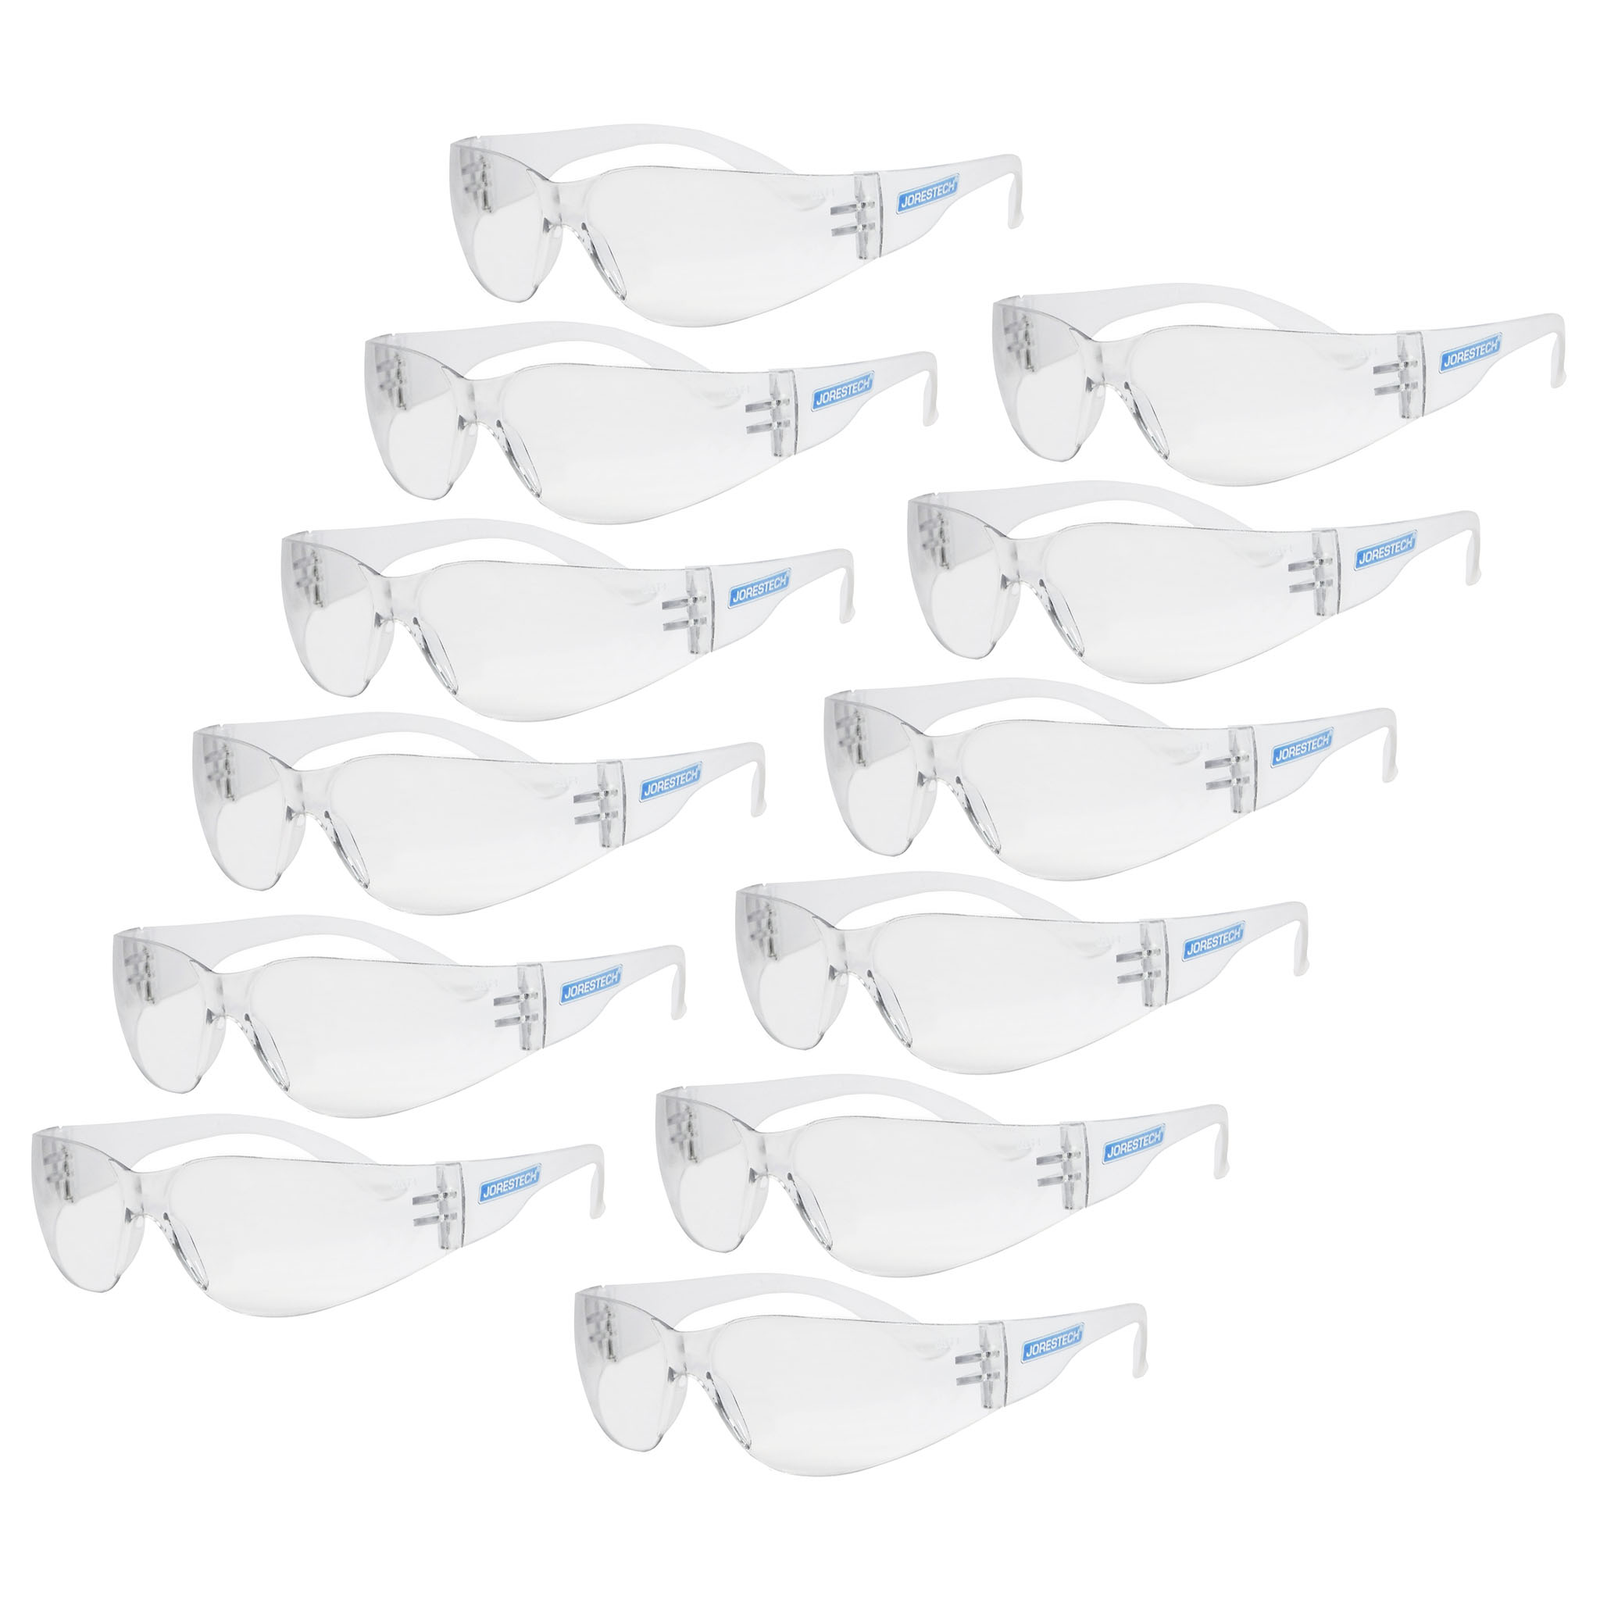 Diagonal view of the clear JORESTECH safety glass for high impact protection model LS-260-CL over white background